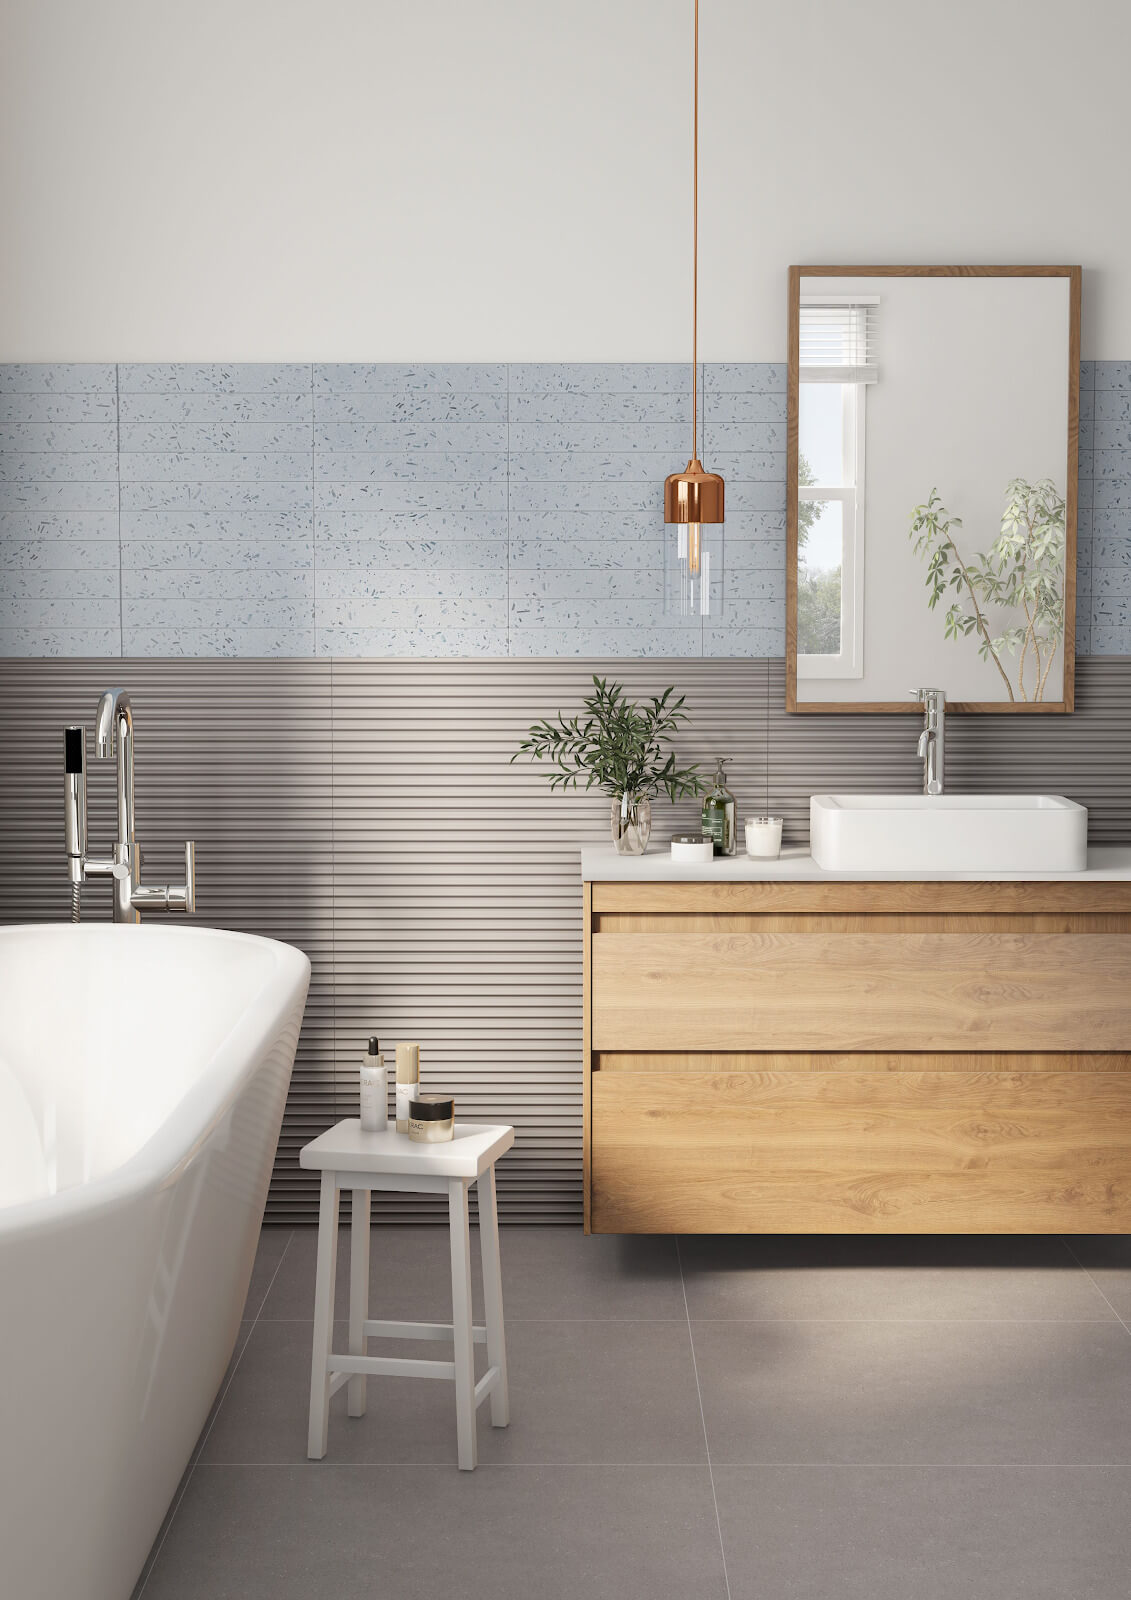 Bathroom wall with baby blue subway tile